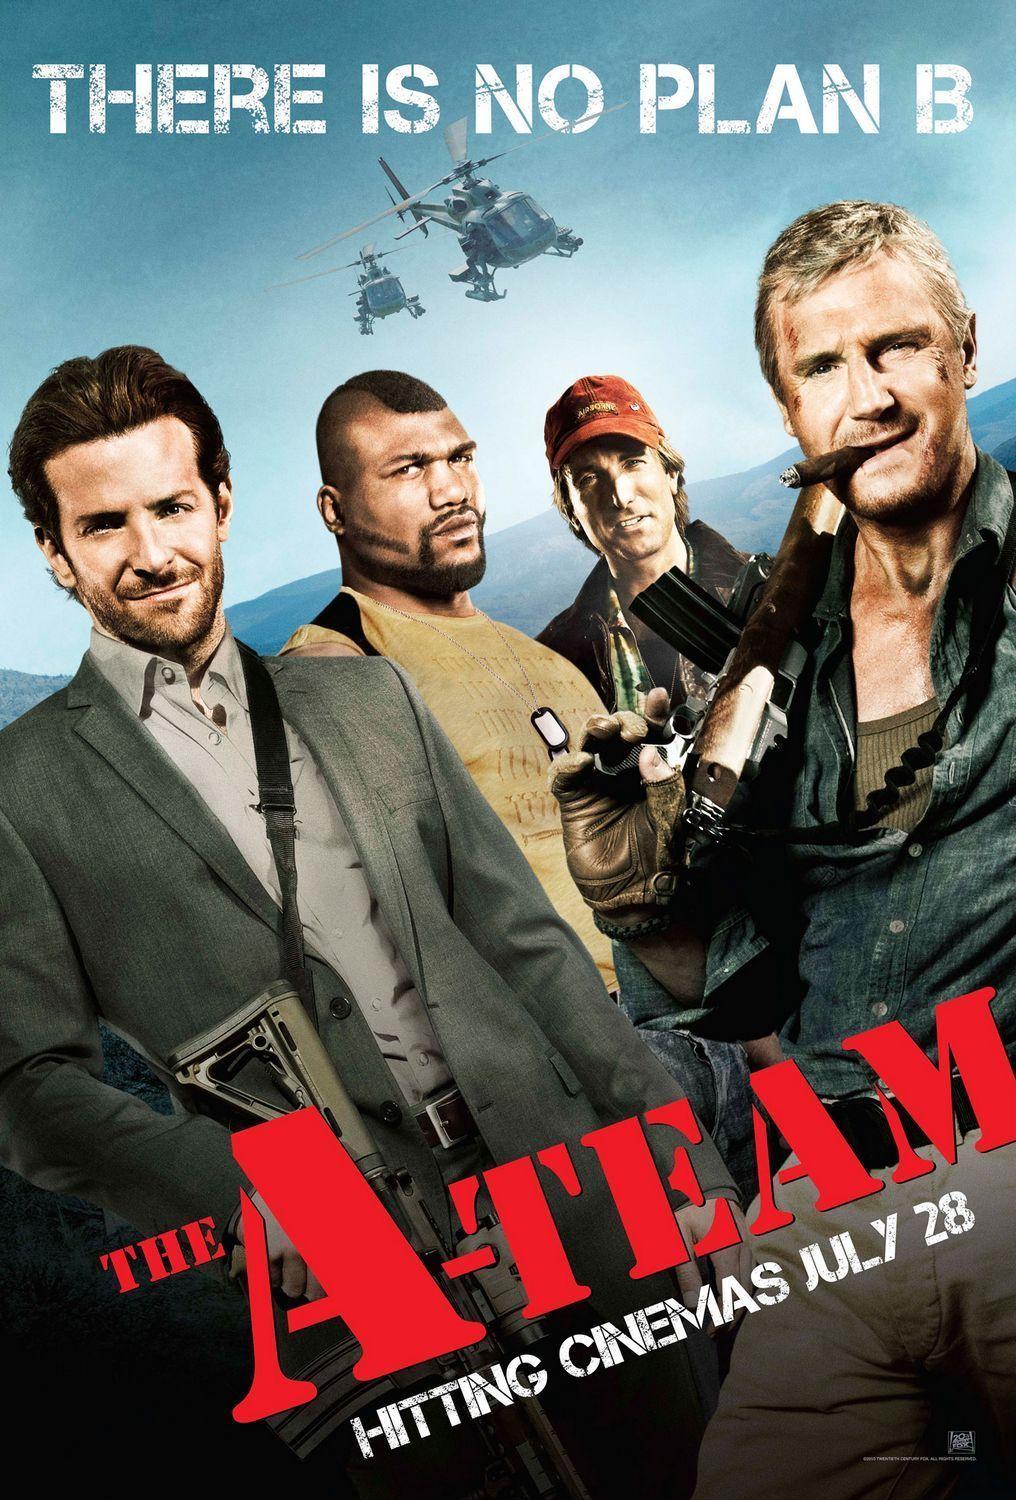 The A Team (2010) Image Poster HD Wallpaper And Background Photo